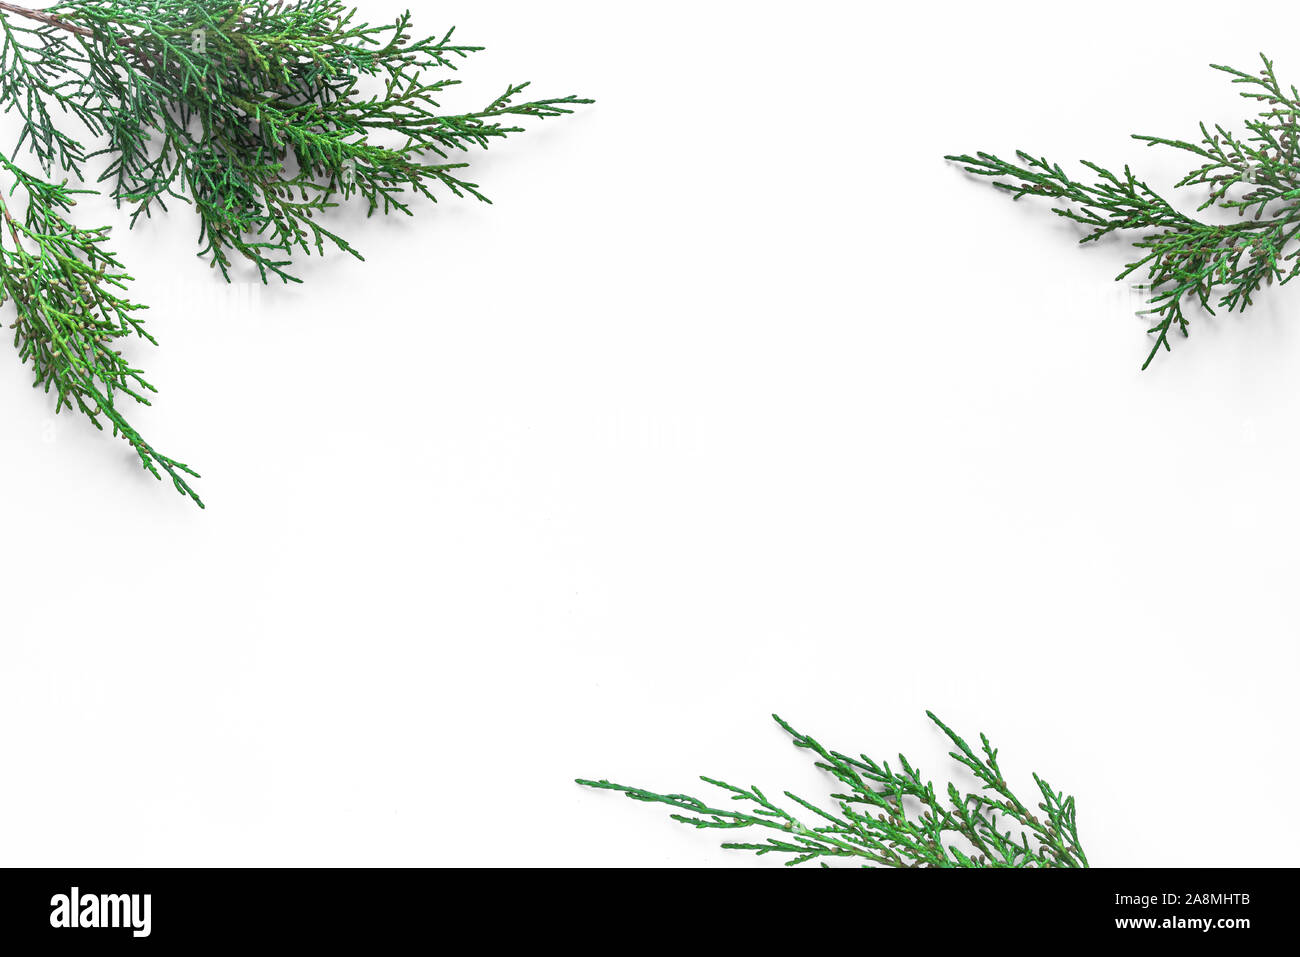 Thuja evergreen plant branches on white background. Top view, copy space. Stock Photo